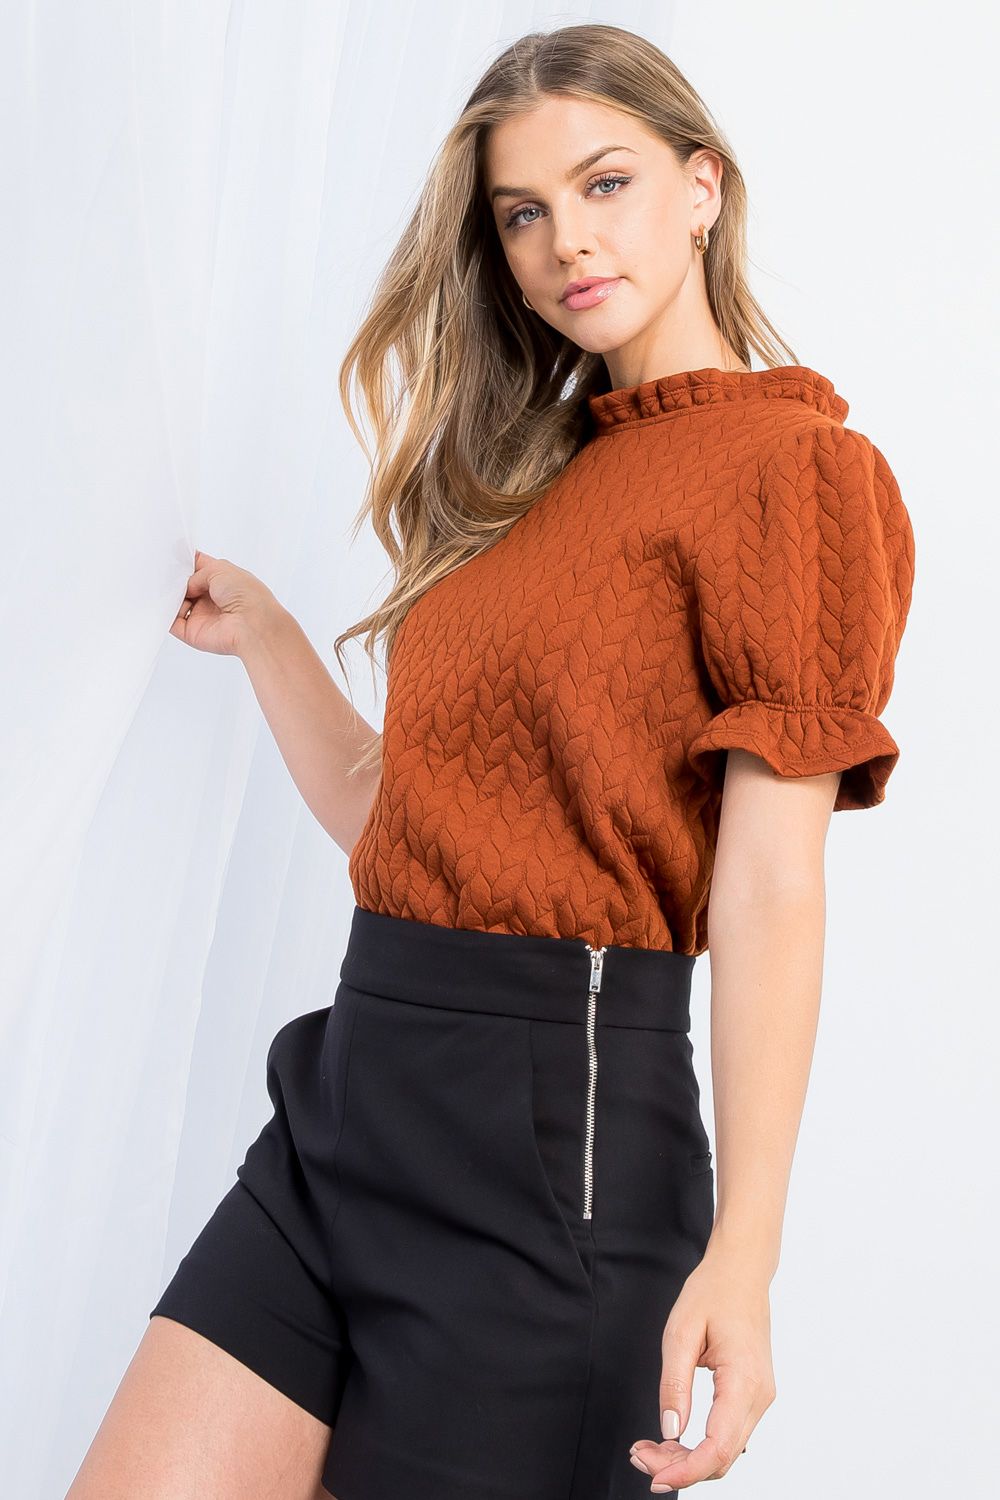 Textured rust colored knit top - Tru Blue Boutique